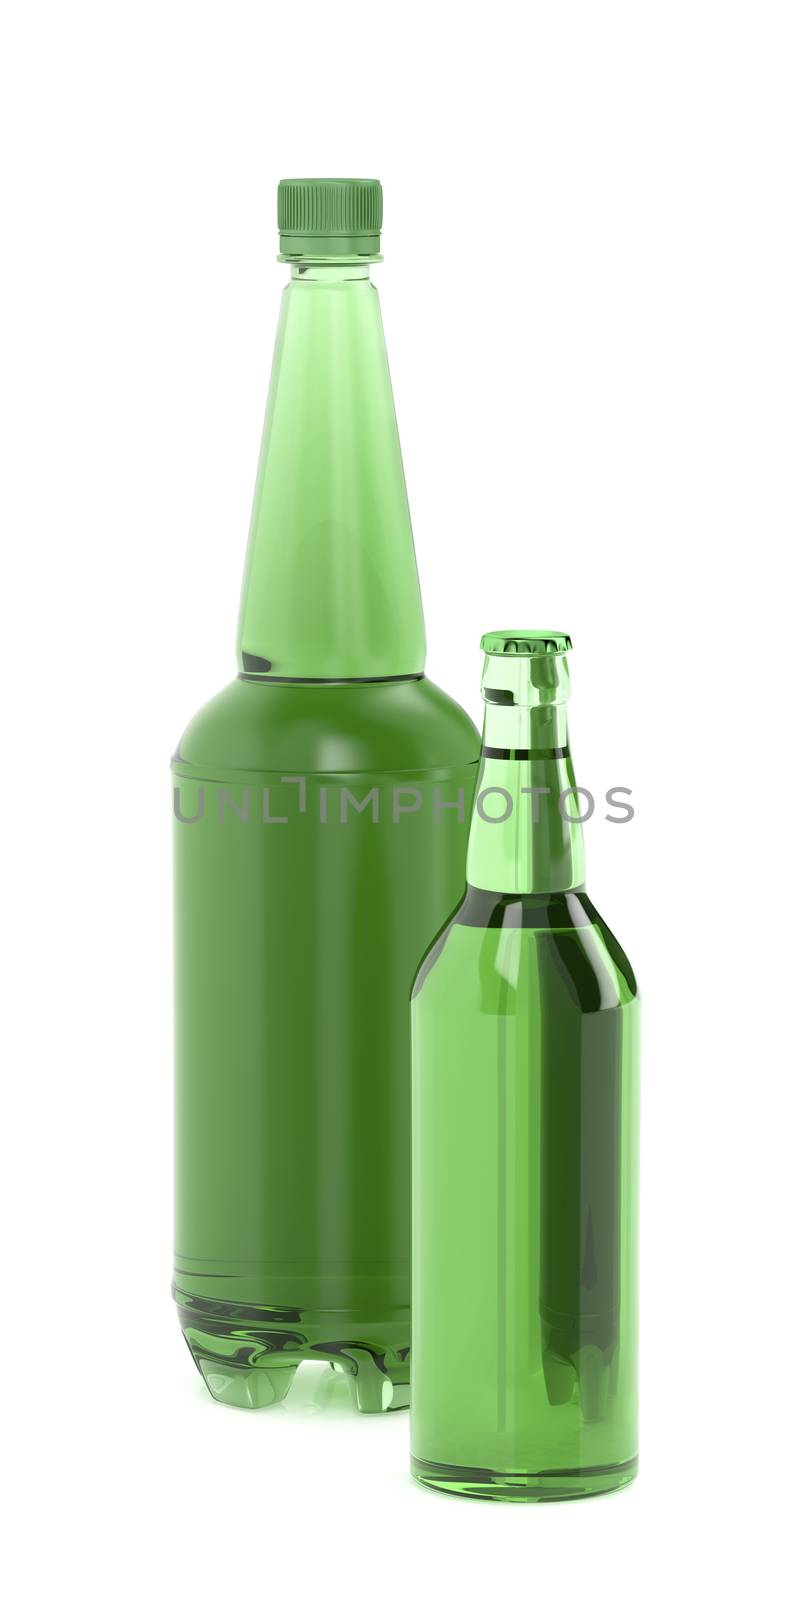 Green beer bottles on white background  by magraphics